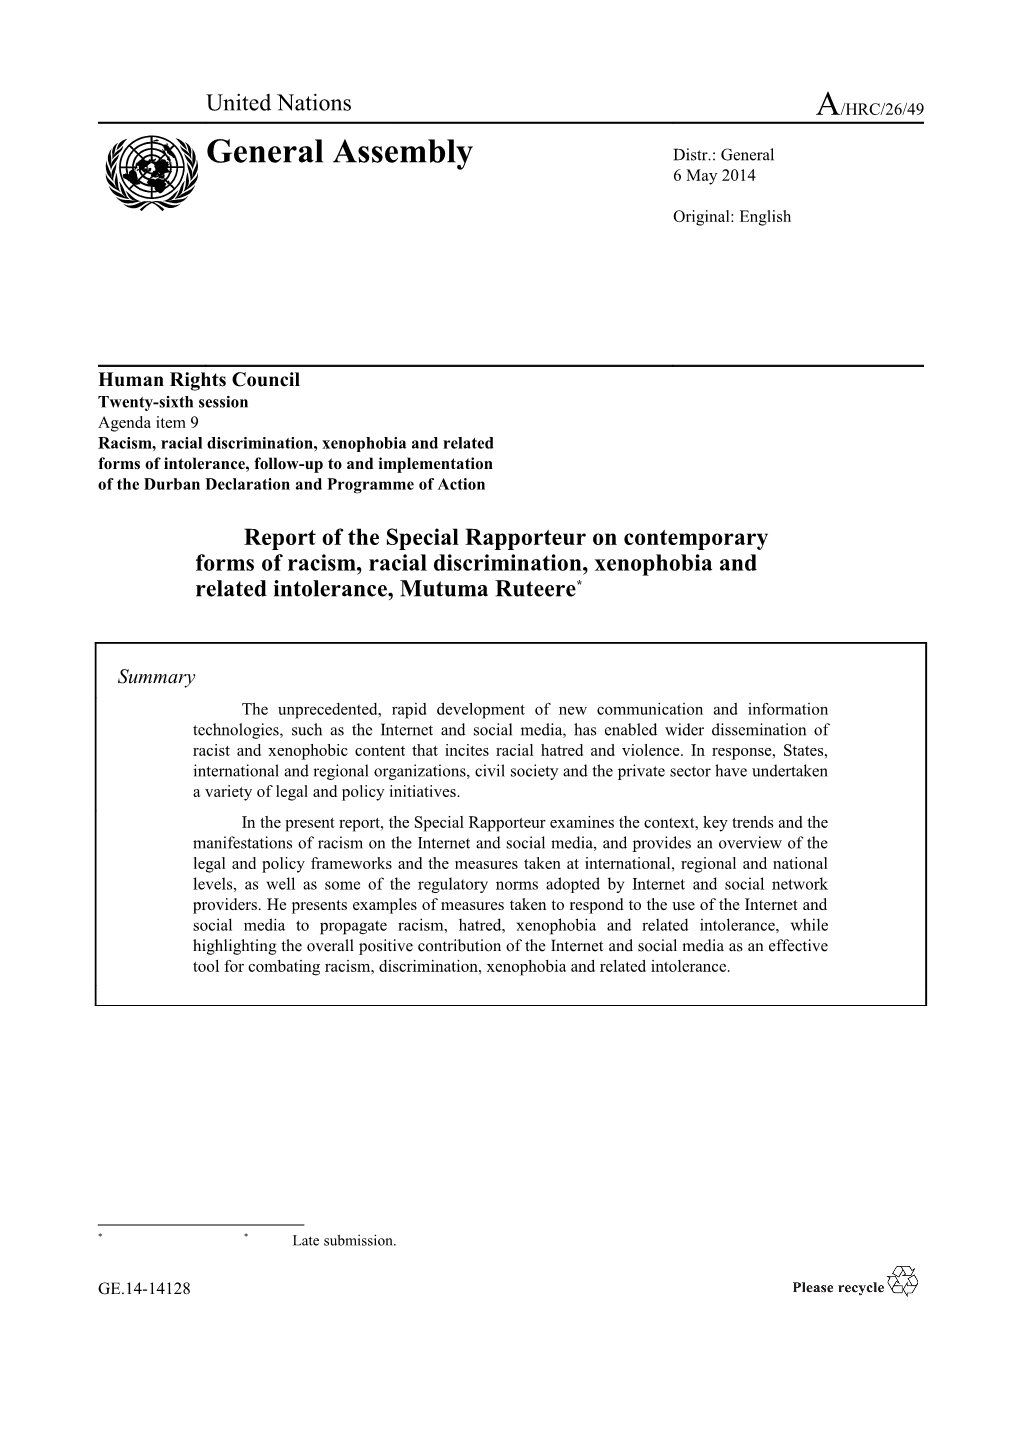 Report of the Special Rapporteur on Contemporary Forms of Racism, Racial Discrimination